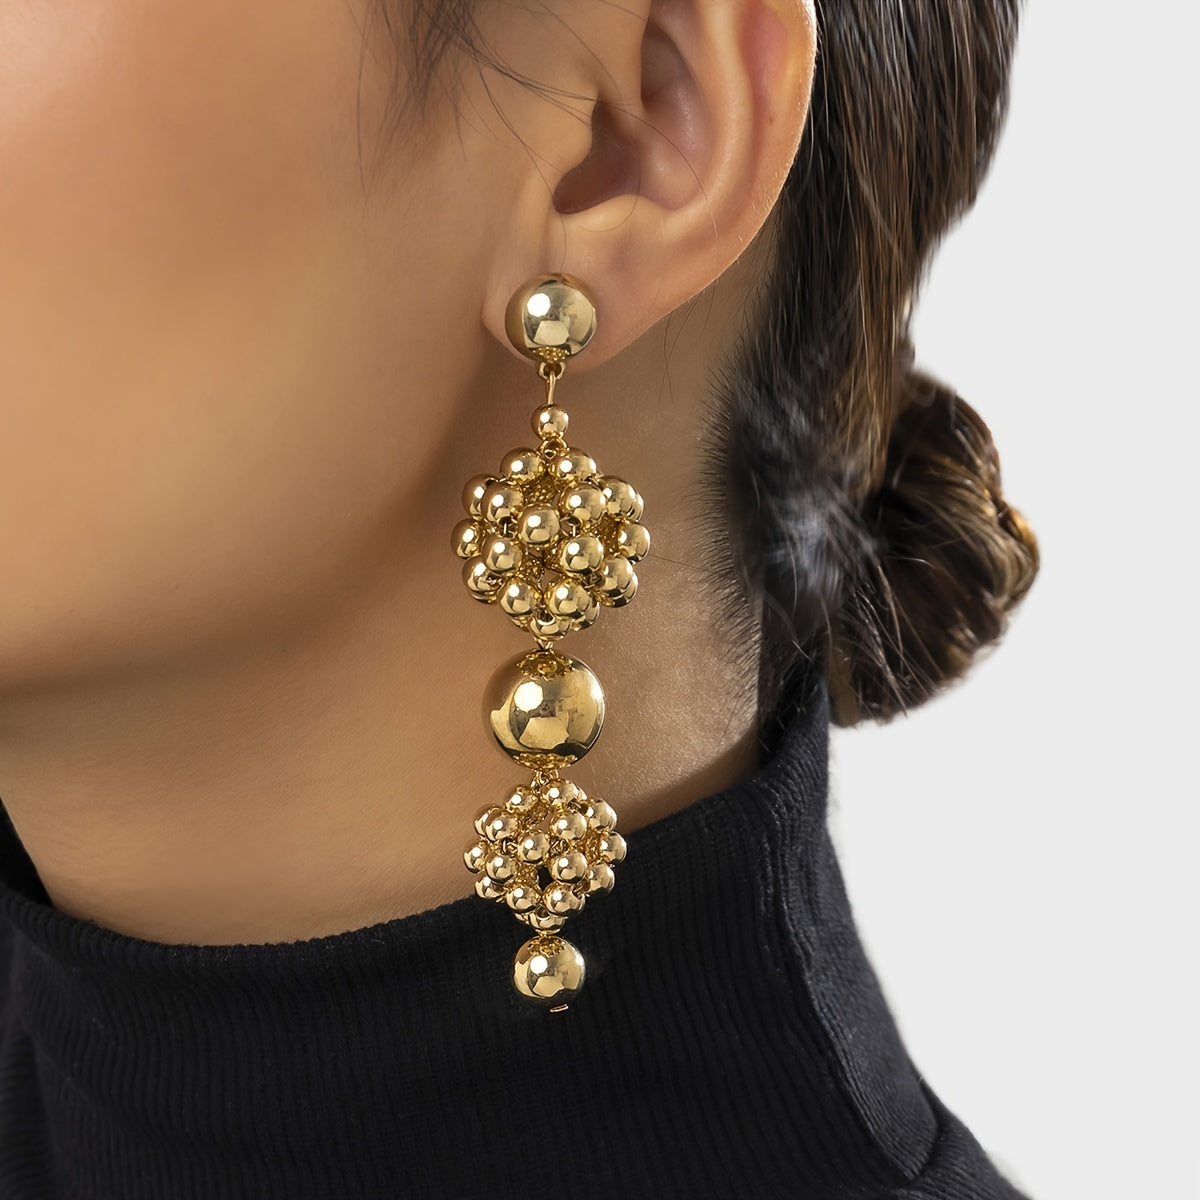 Vintage Exaggerated Handwoven Flower Ball Long Drop Earrings For Women Holiday Decor Jewelry